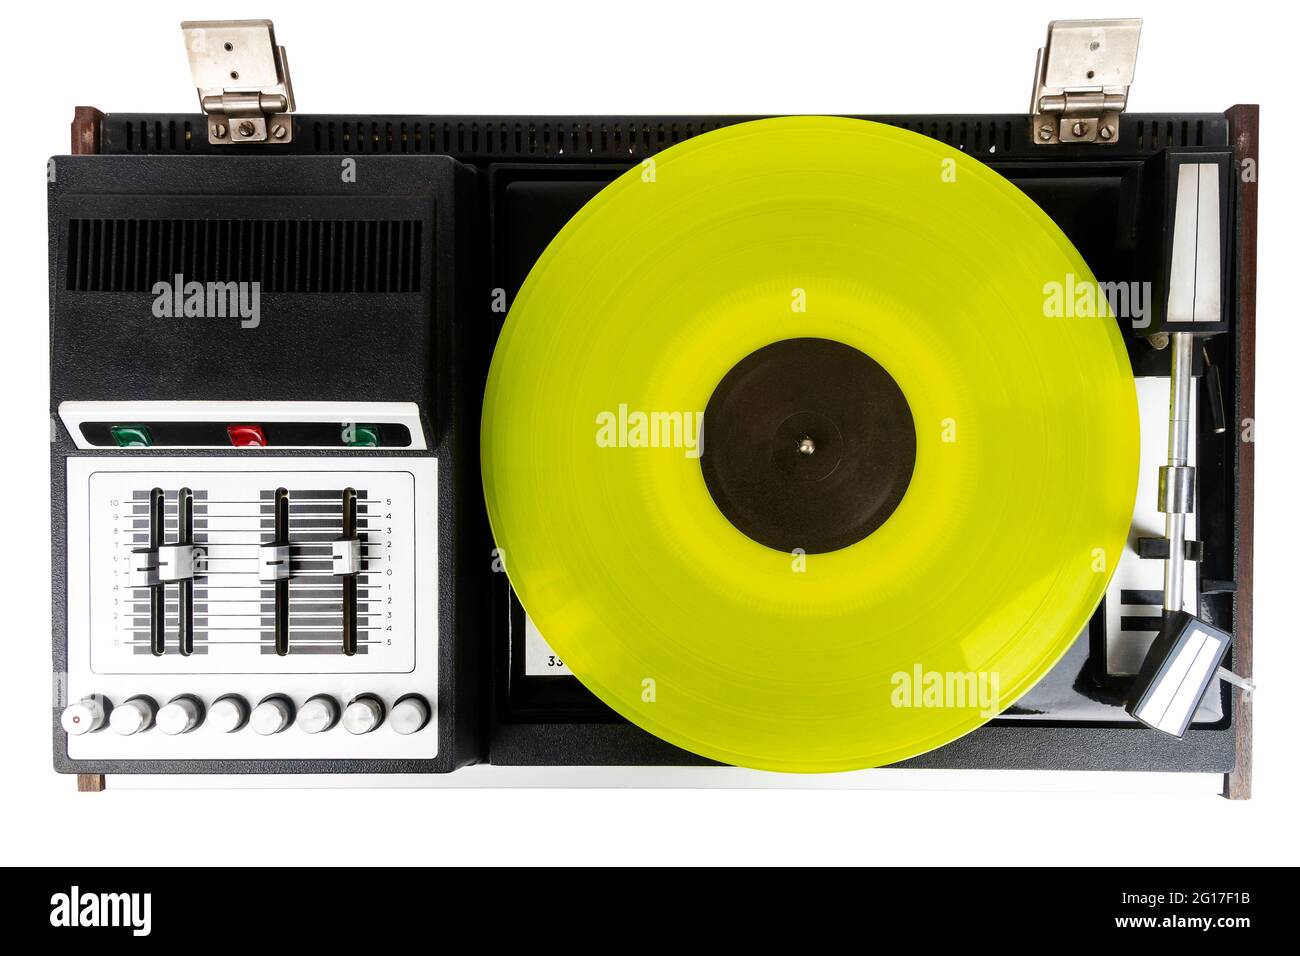 Vintage turntable vinyl record player with yellow vinyl isolated on white background. Stock Photo